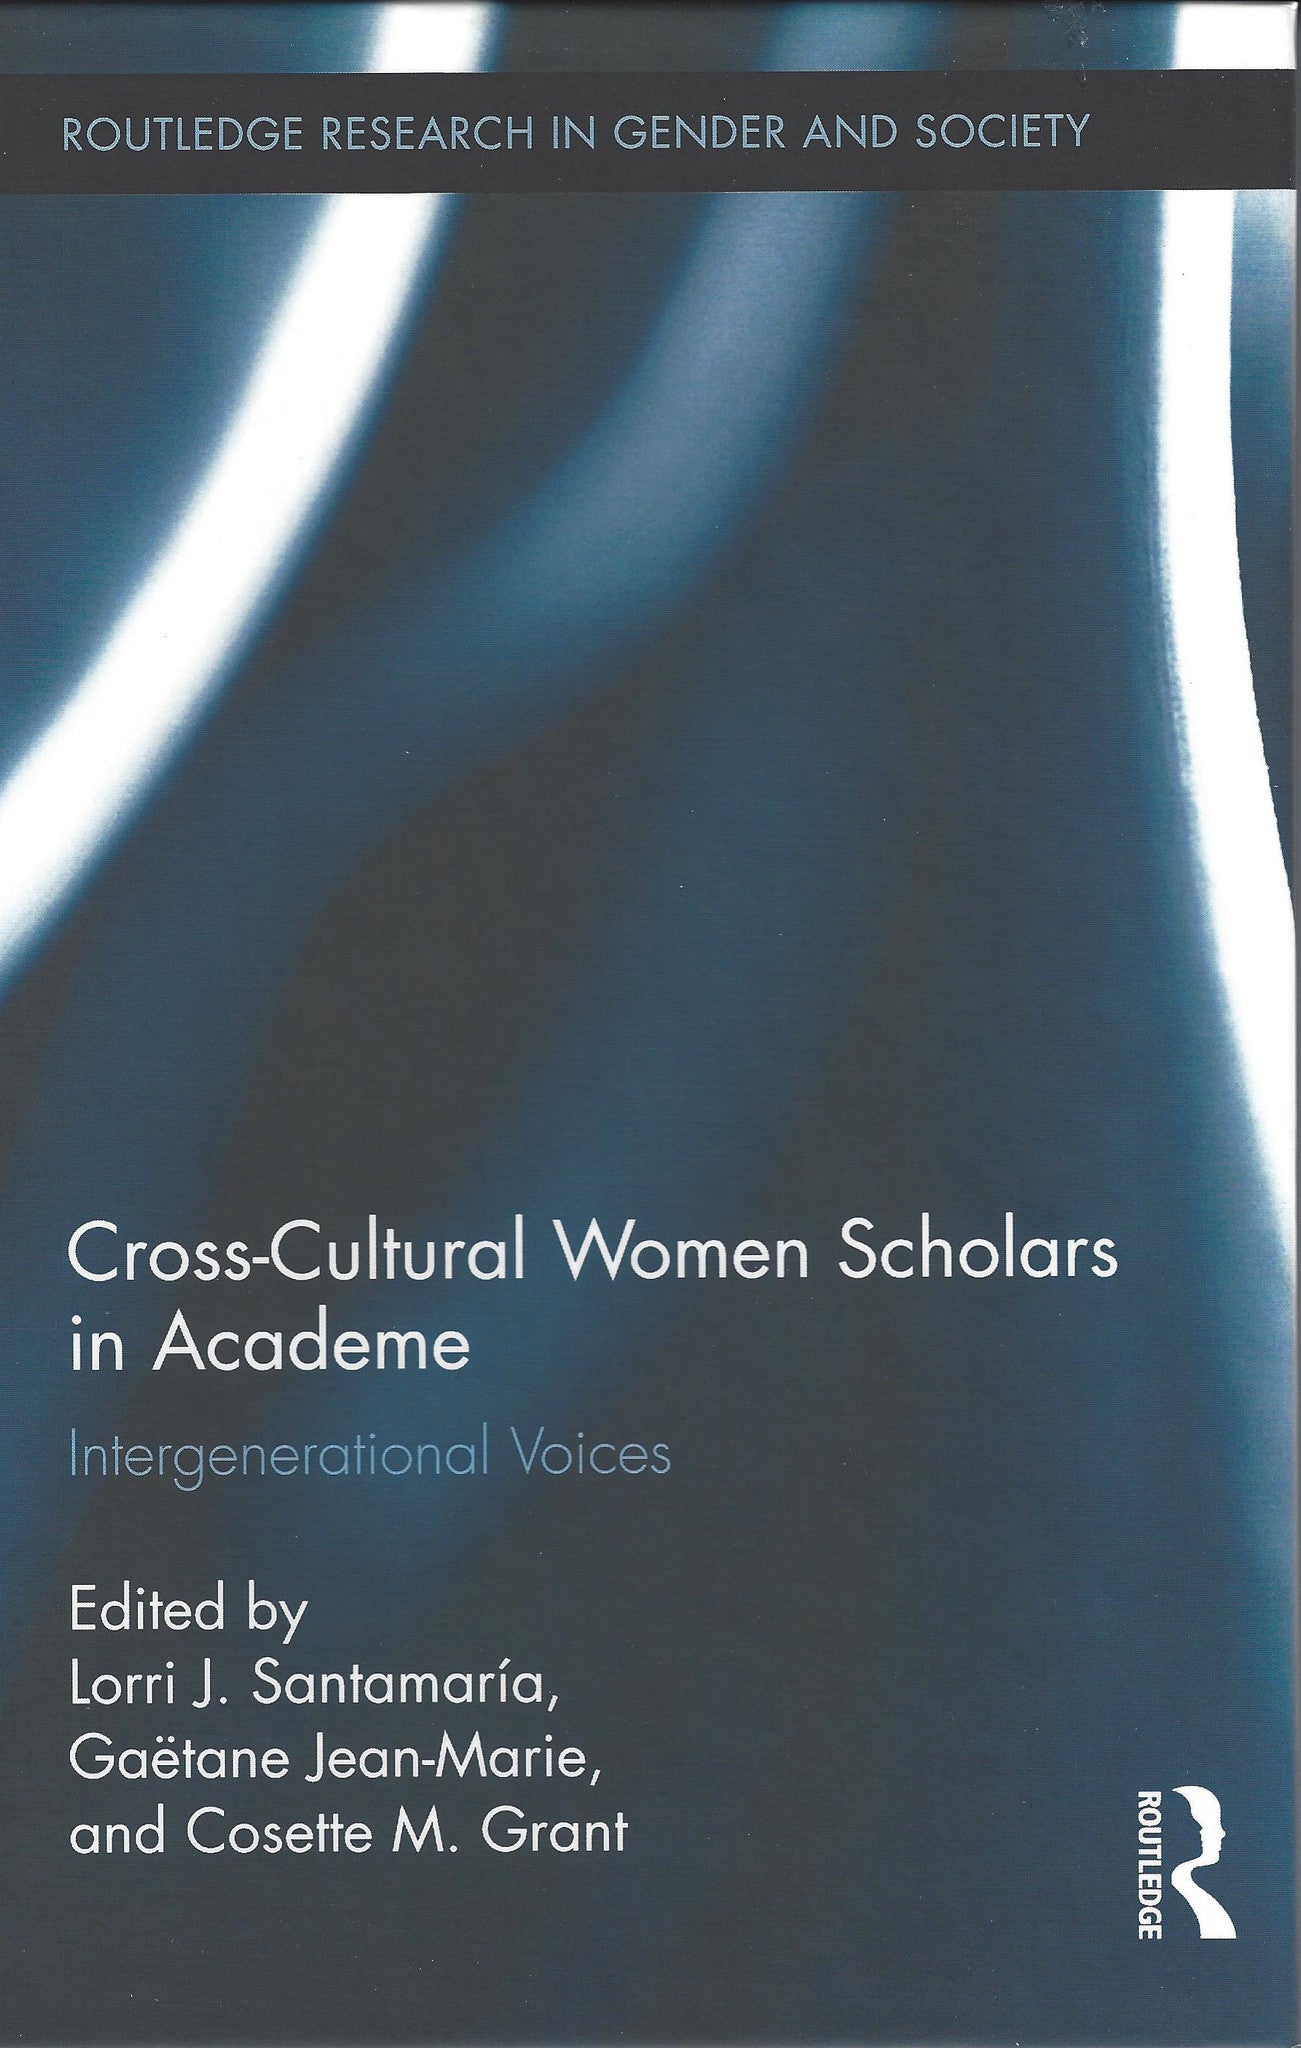 Cross-Cultural Women Scholars in Academe: Intergenerational Voices (Routledge Research in Gender and Society) , Book - Daybreak International Bookstore, Daybreak Press Global Bookshop
